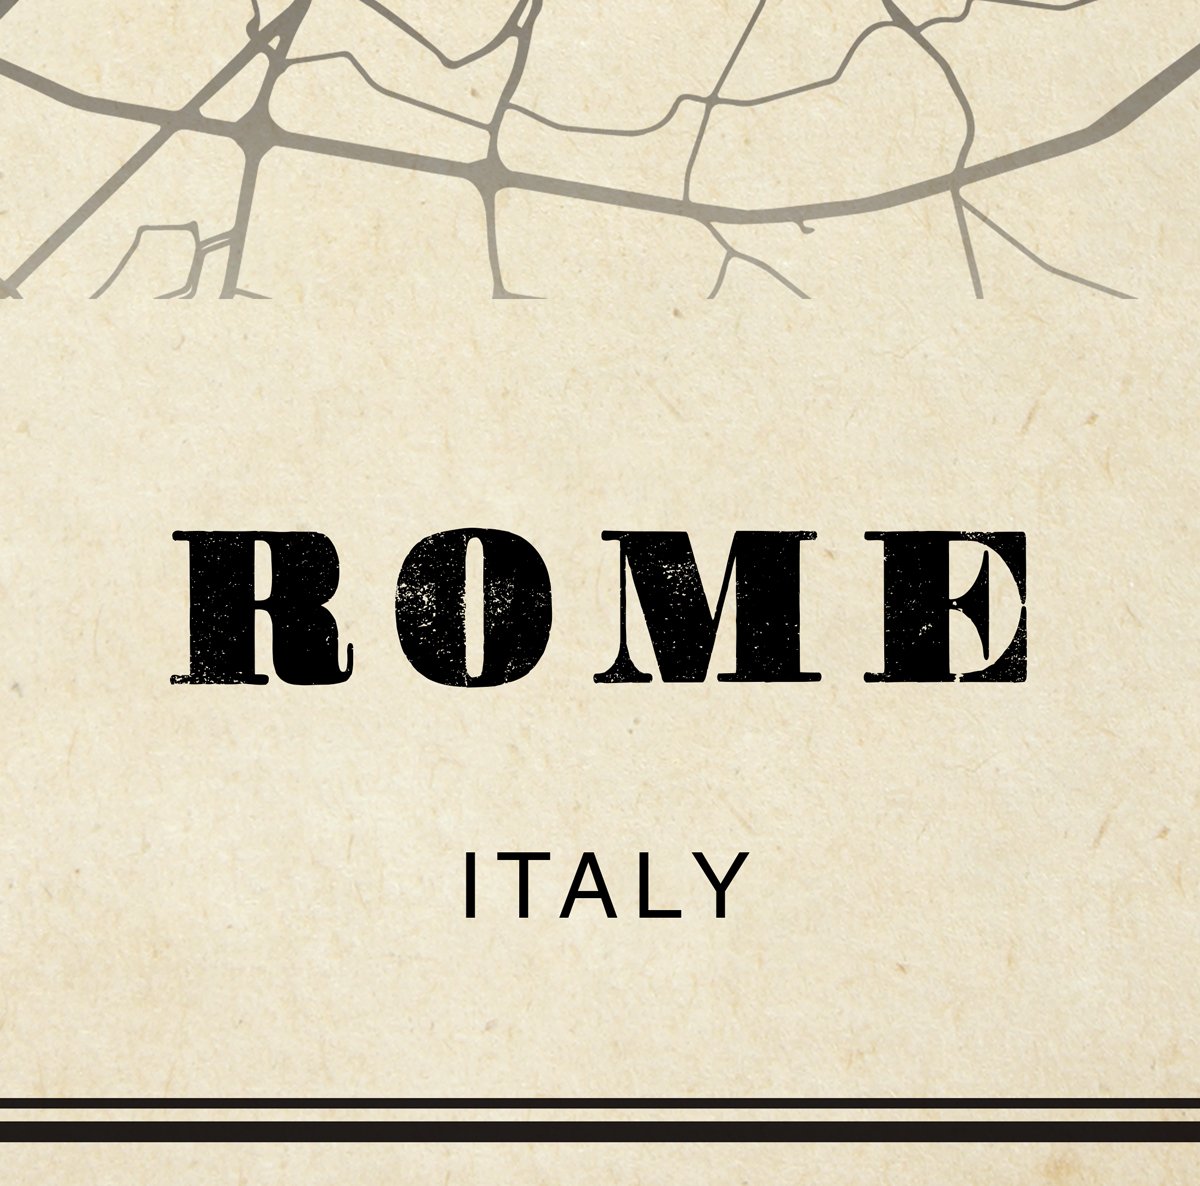 Rome City Map Sepia Poster